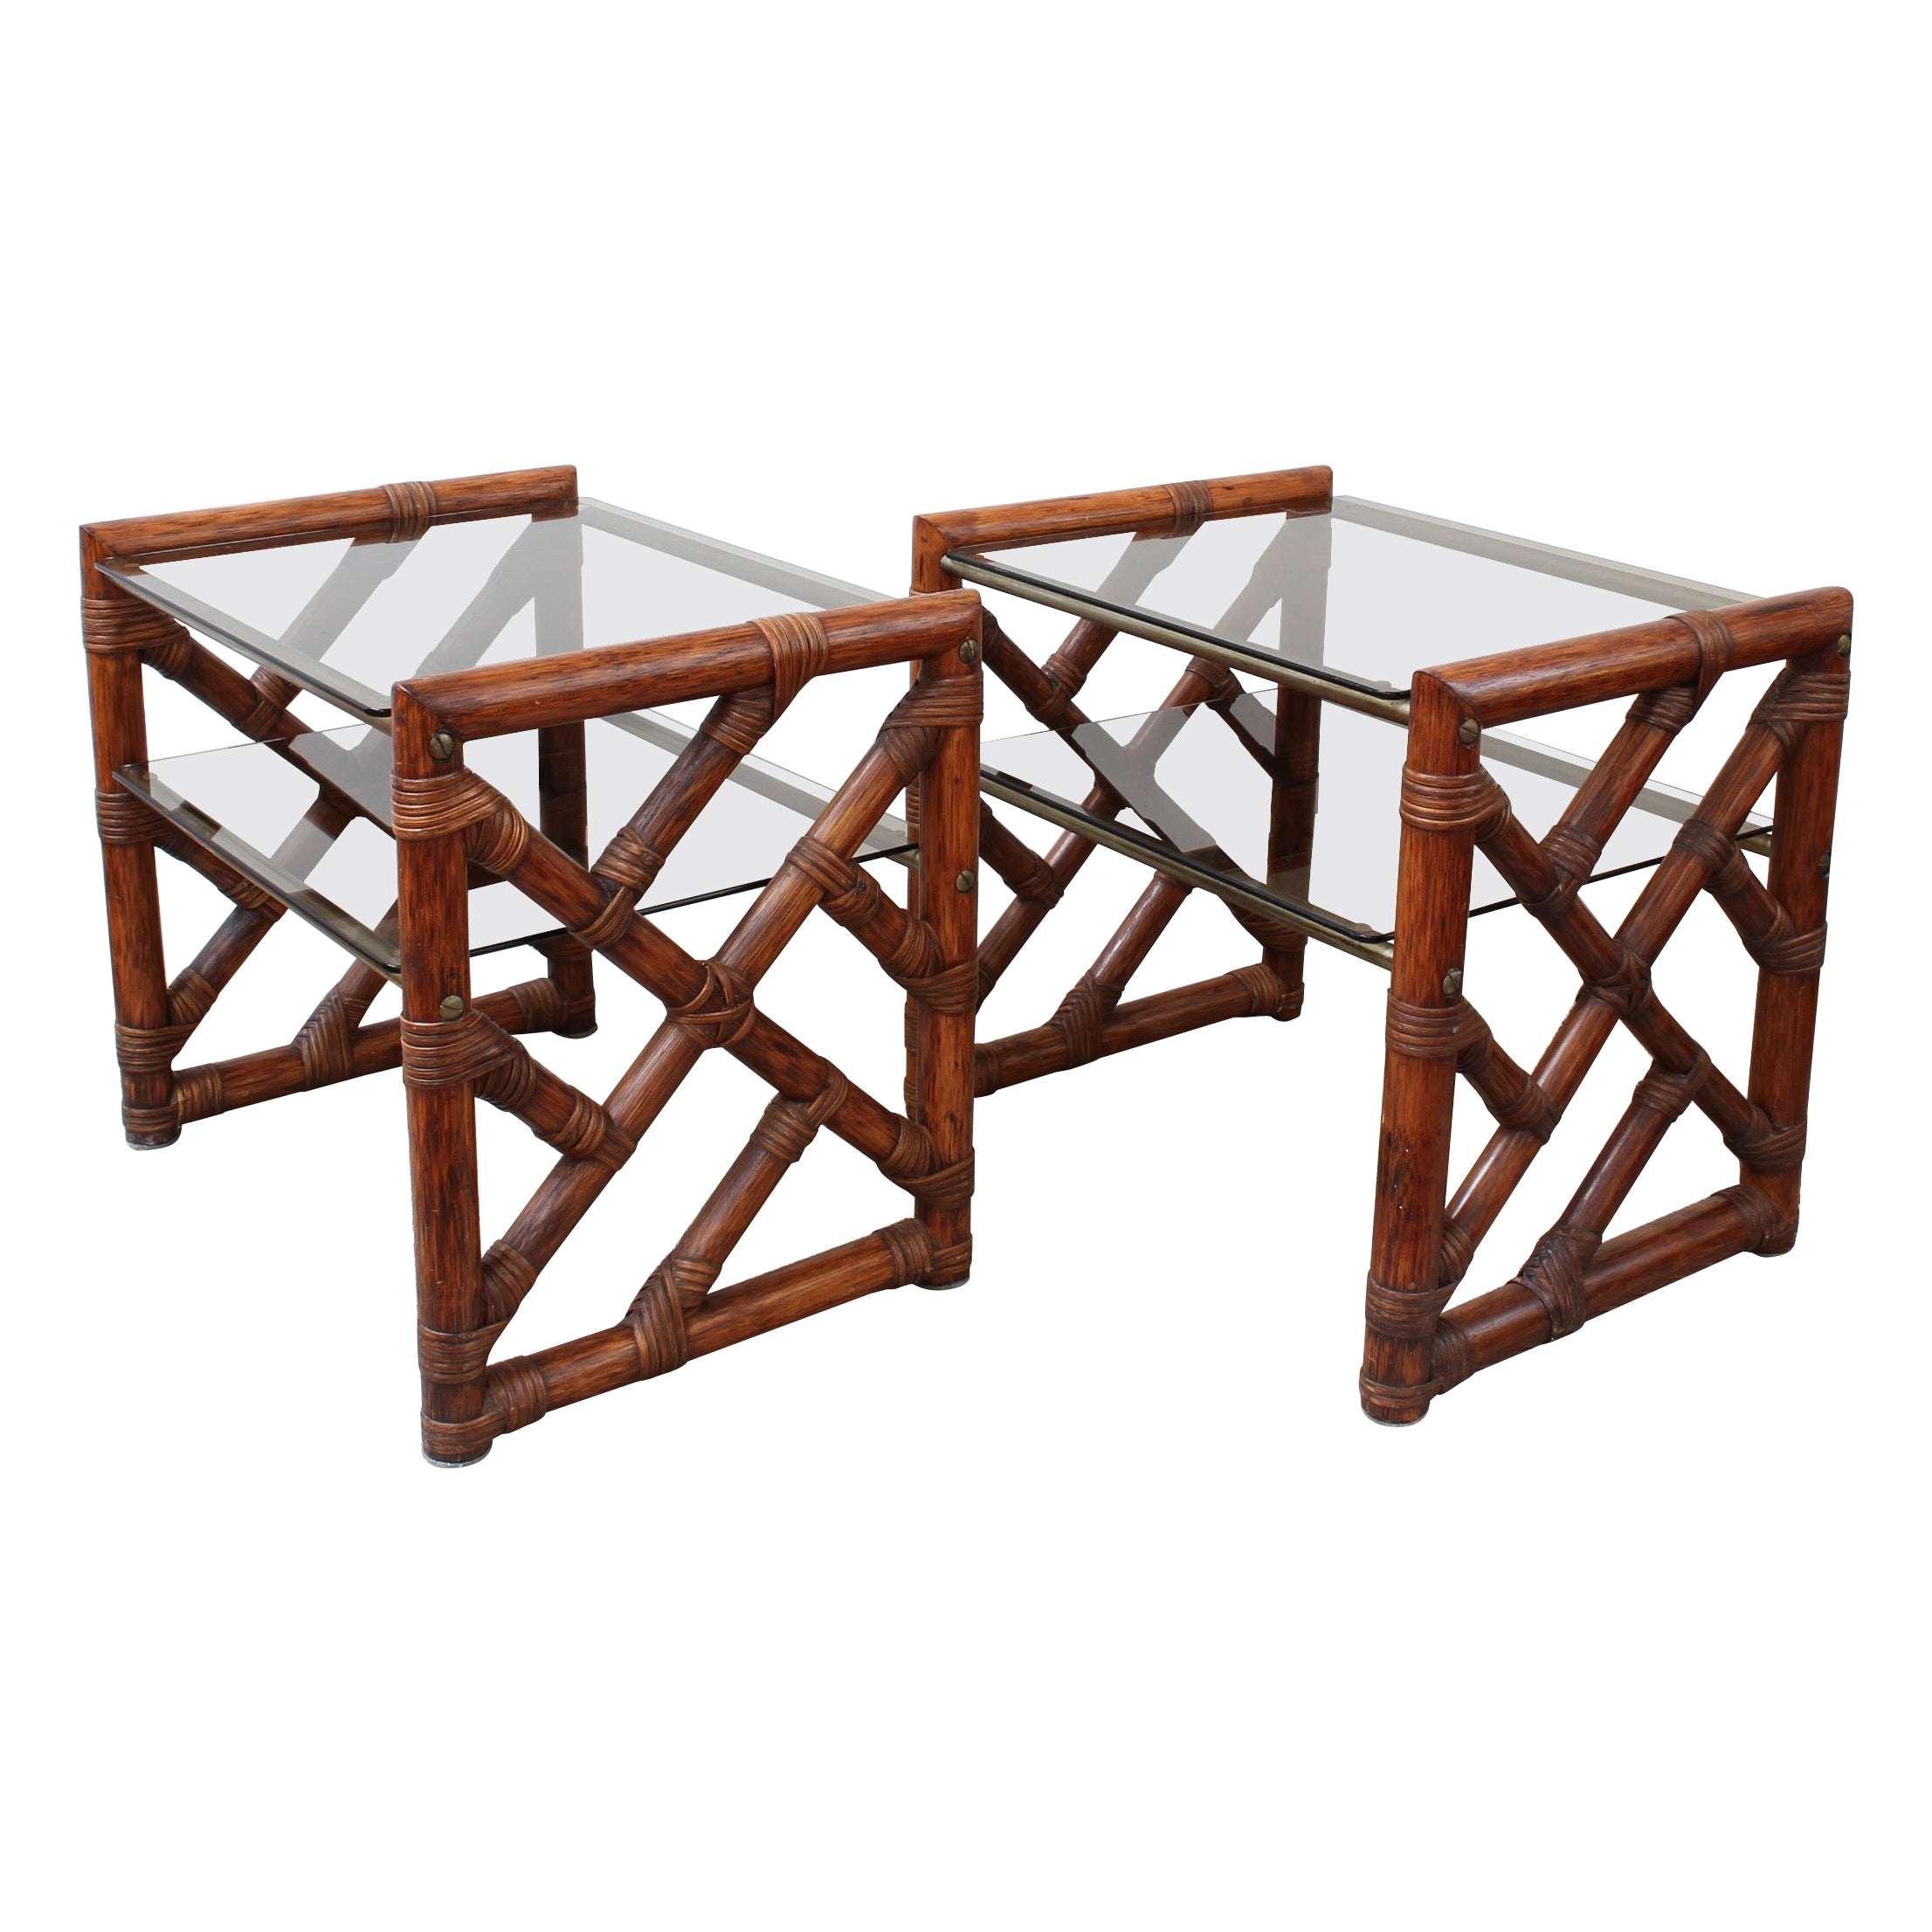 Pair of Vintage Italian Bamboo Side Tables with Glass Tops 'circa 1970s'